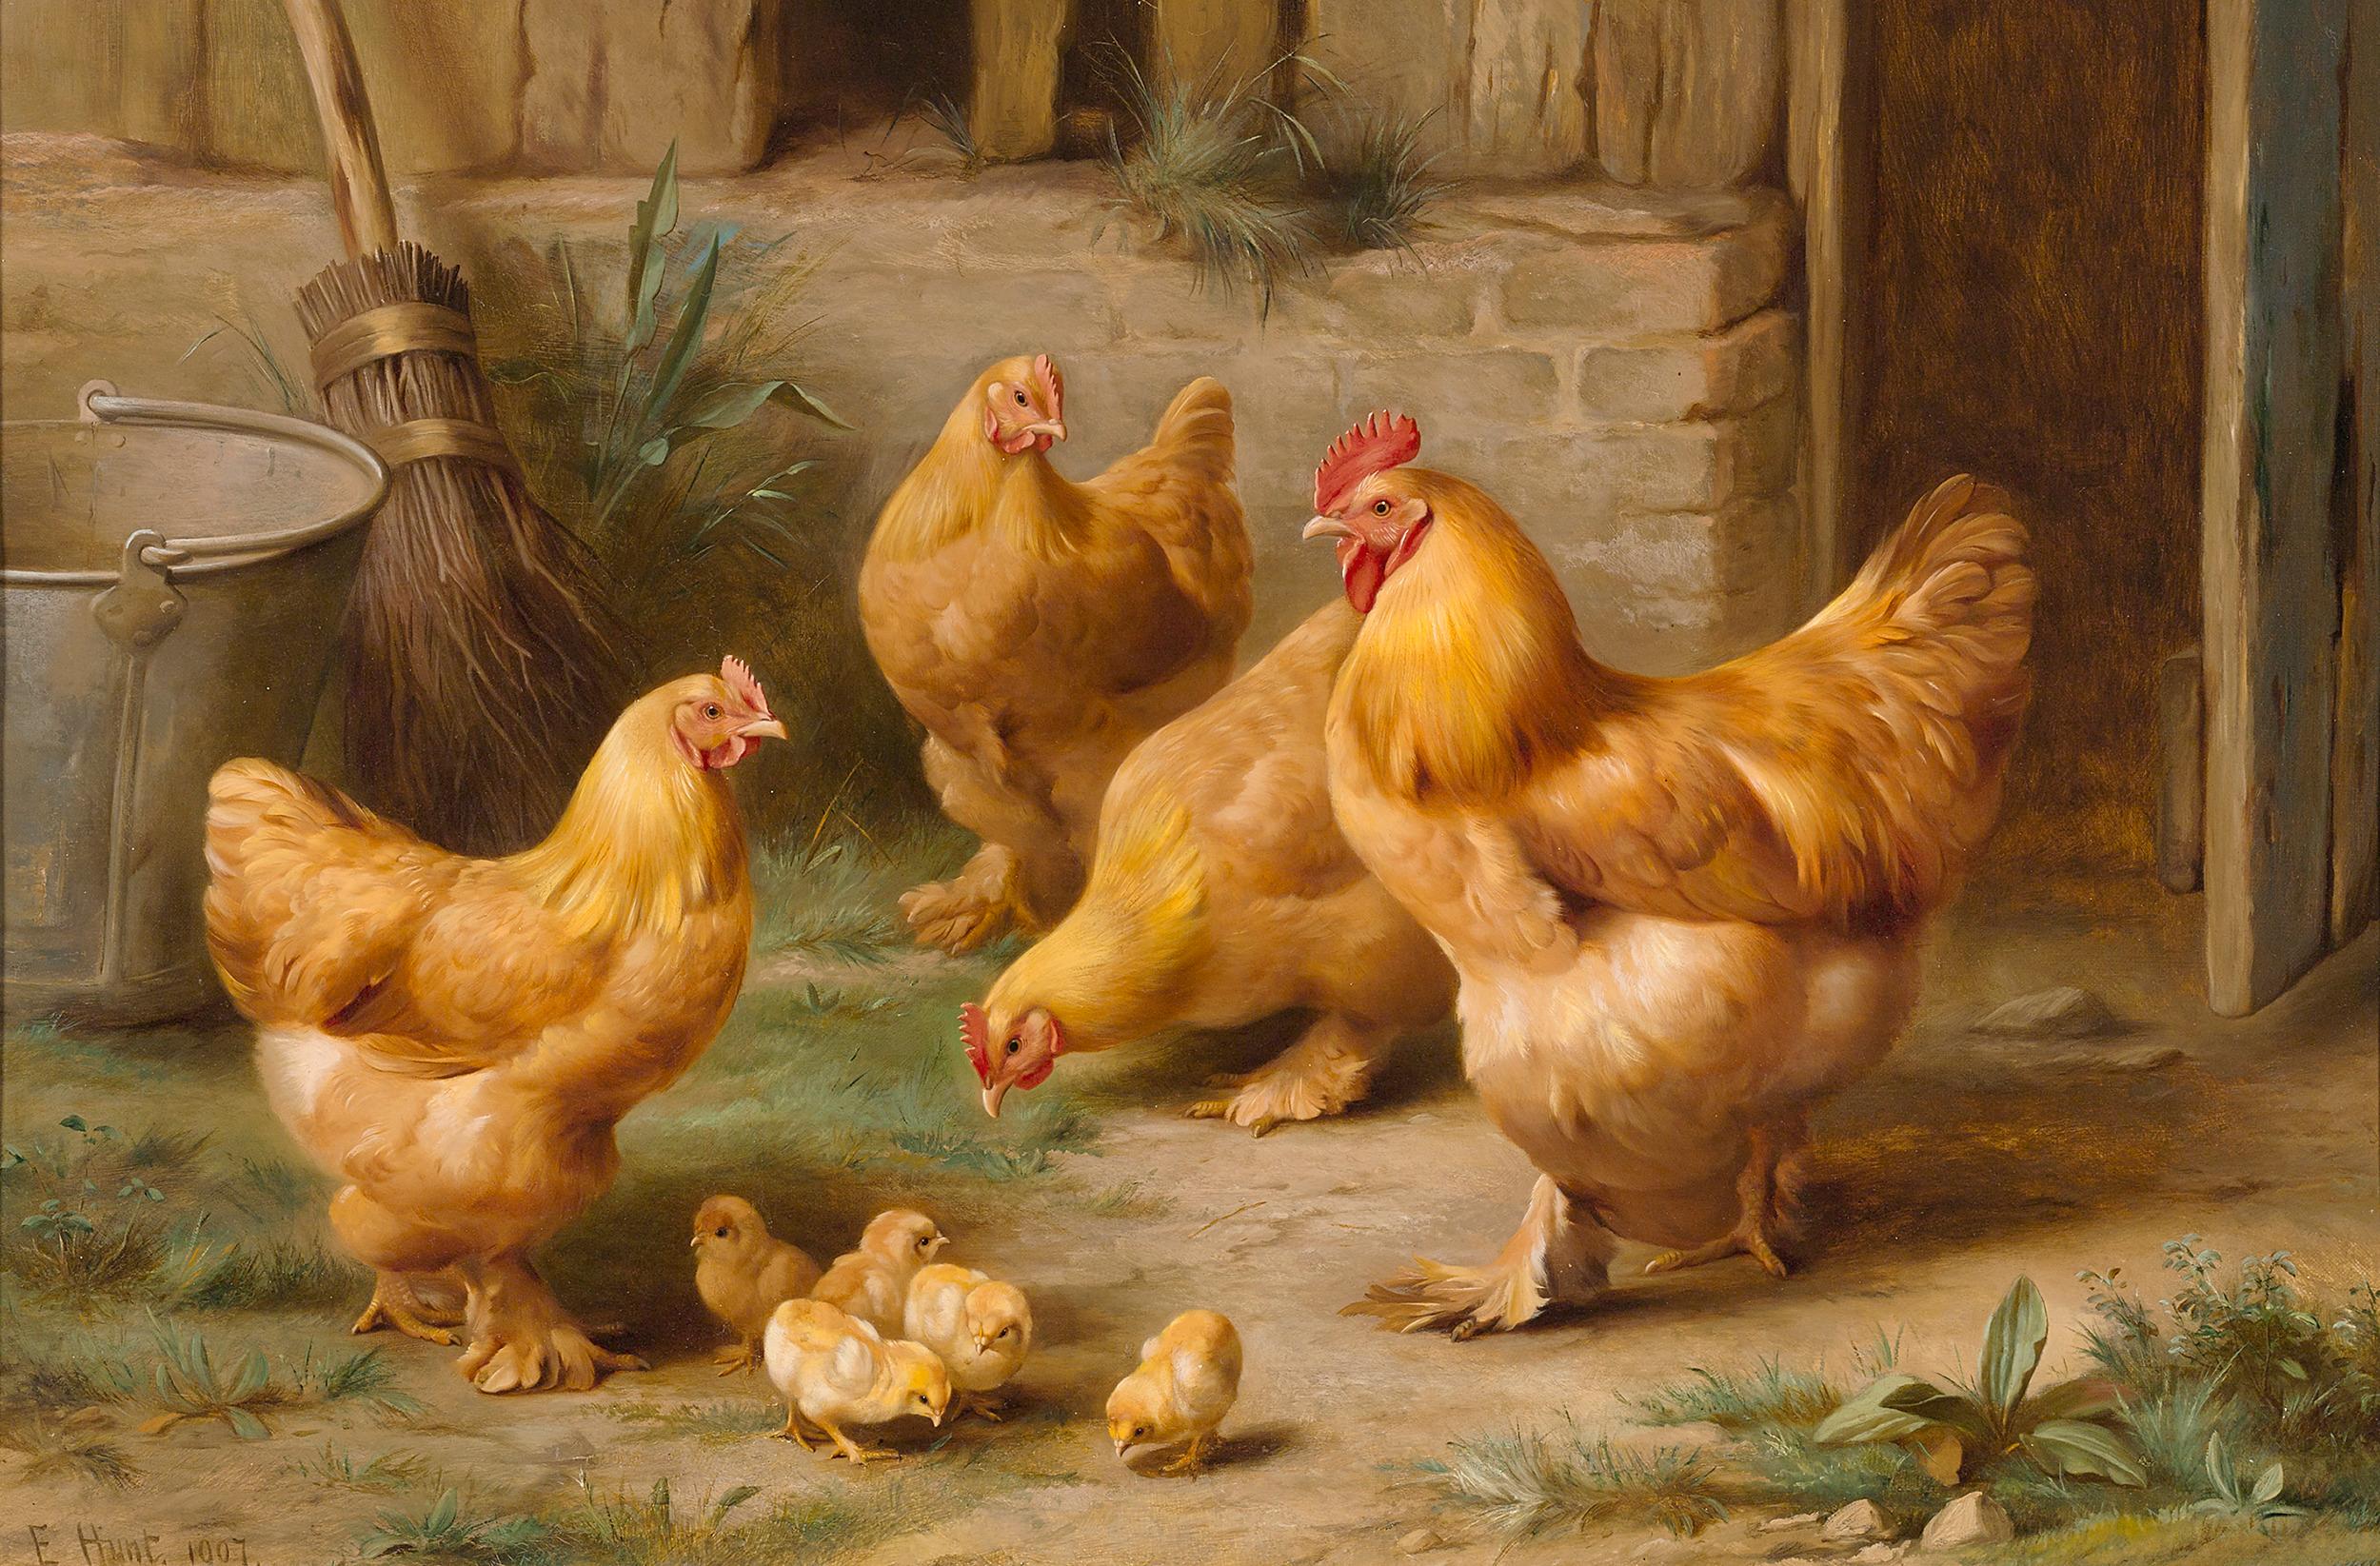 Edgar Hunt
1876-1955  British

Chicken and Chicks

Signed and dated "E Hunt 1907" (lower left)
Oil on canvas

Edgar Hunt’s realistic paintings of tranquil rural life, distinguished by their meticulous attention to detail, placed the artist among the